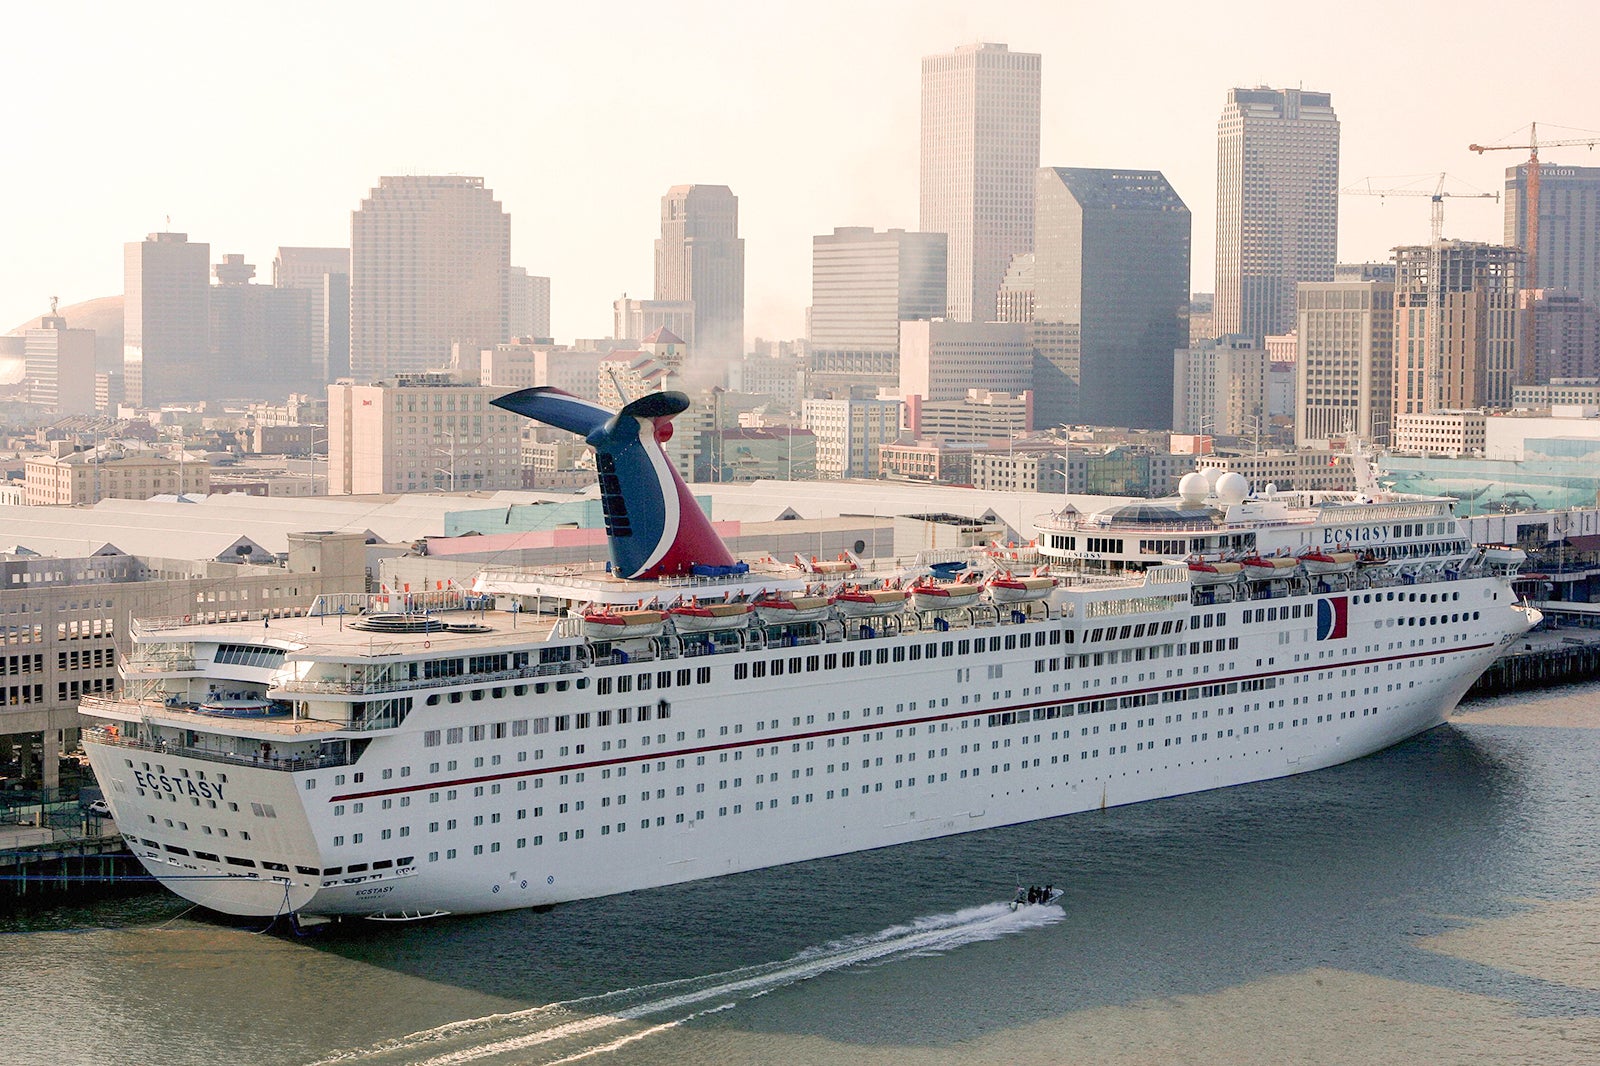 the smallest carnival cruise ship